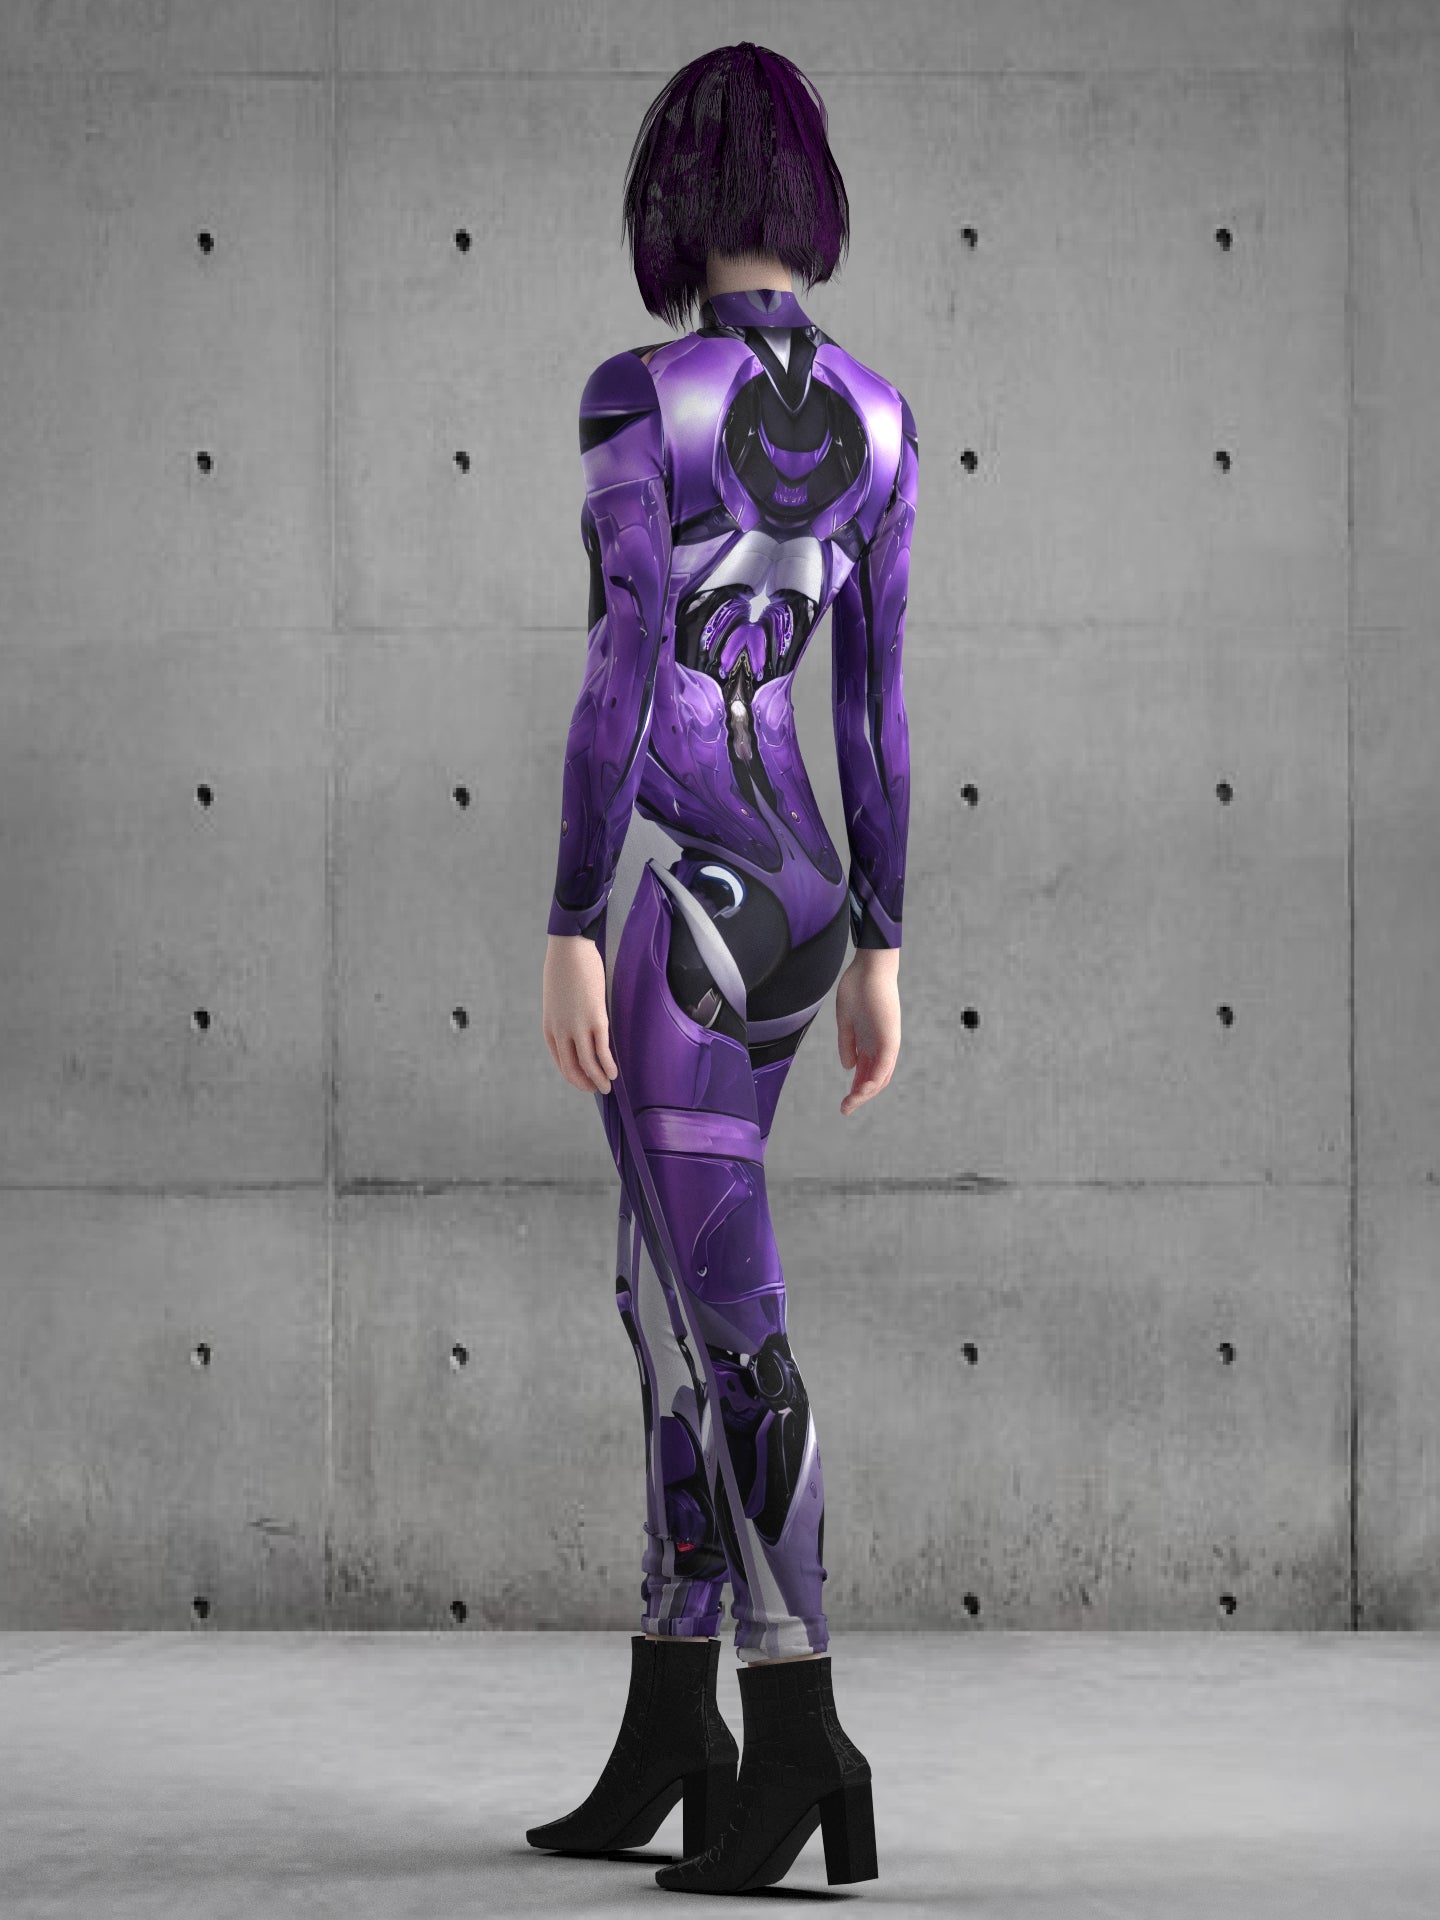 A50 Alien Costume, Cyberpunk Custom Fit Available, Rave Outfit, Women, Futuristic Clothing, Spandex